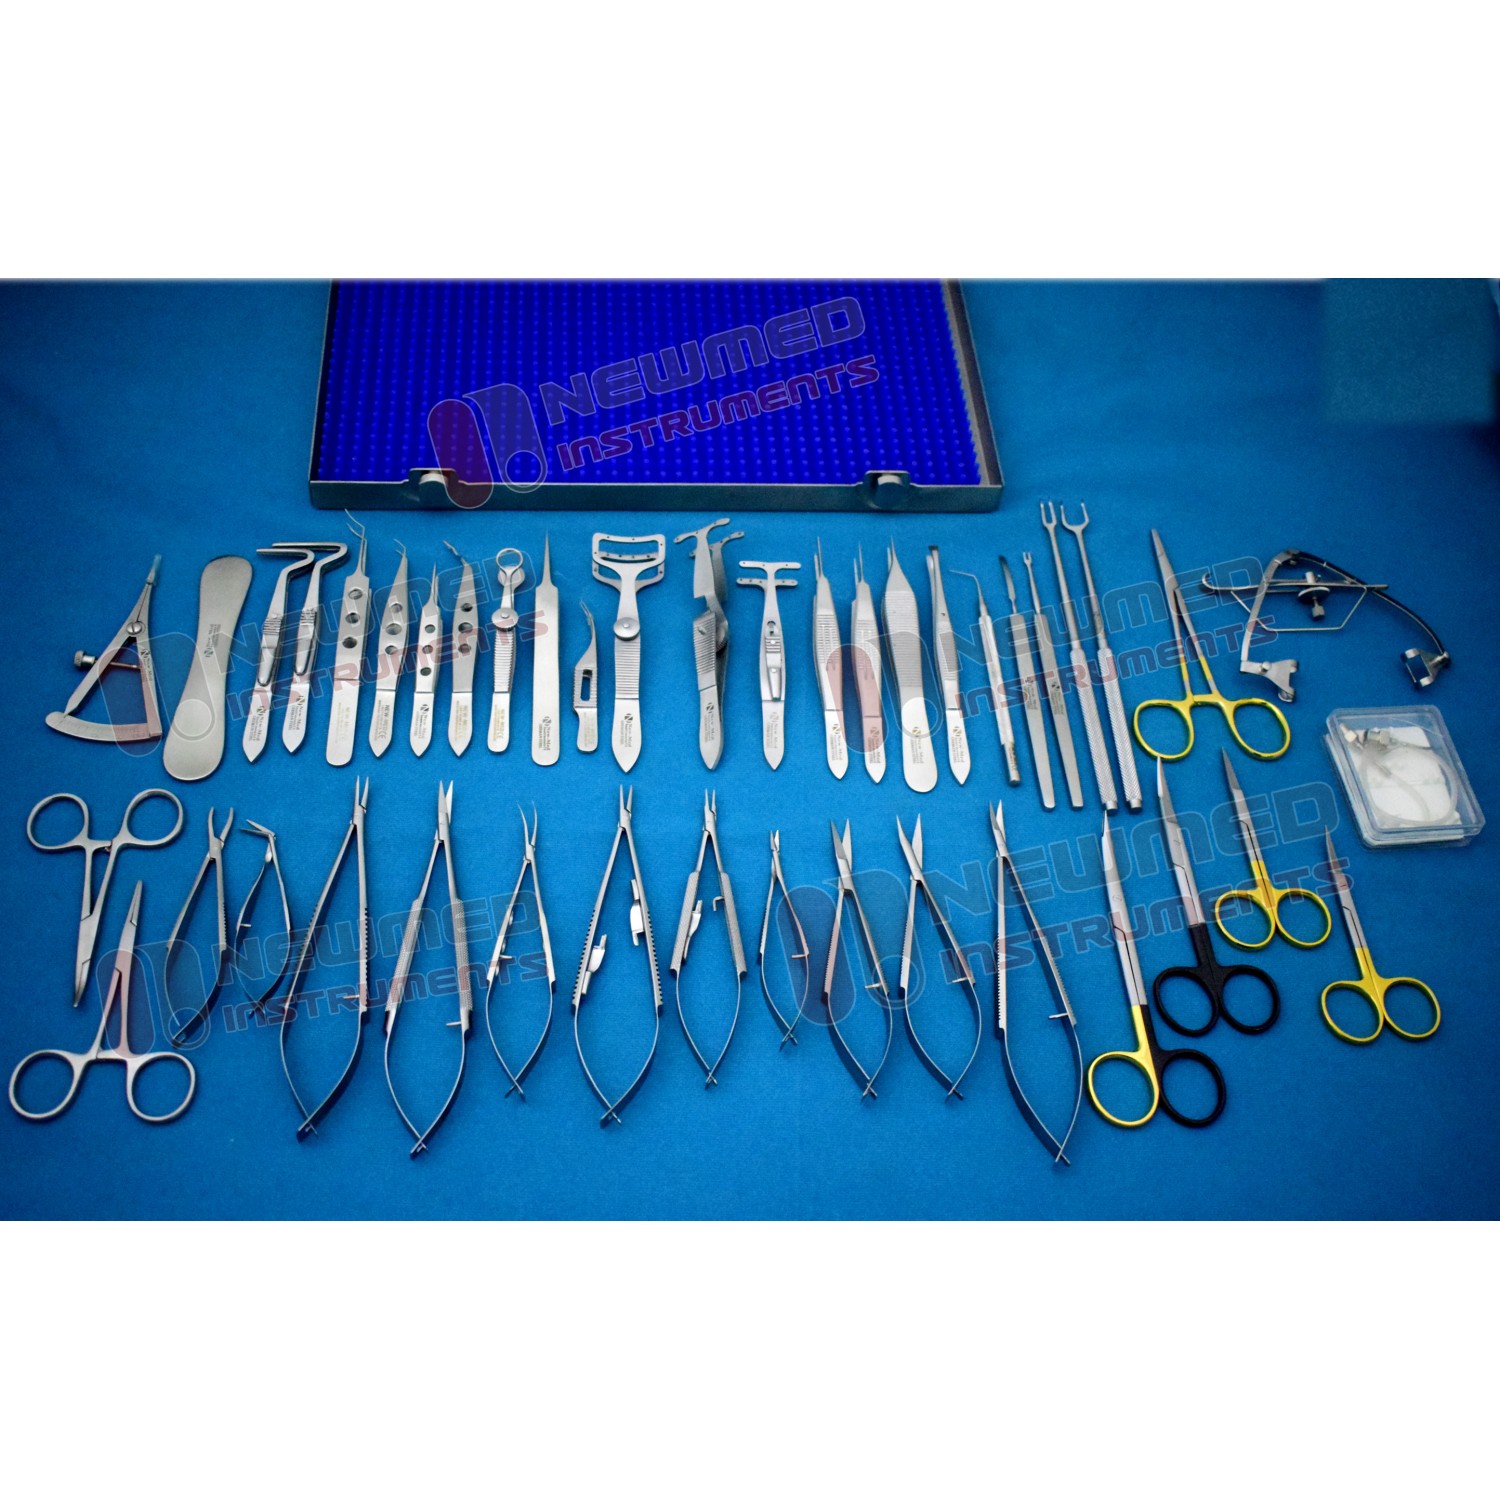 21 Pc Eye Micro Minor Surgery Surgical Opthalmic Instrument Student Set EY-035 